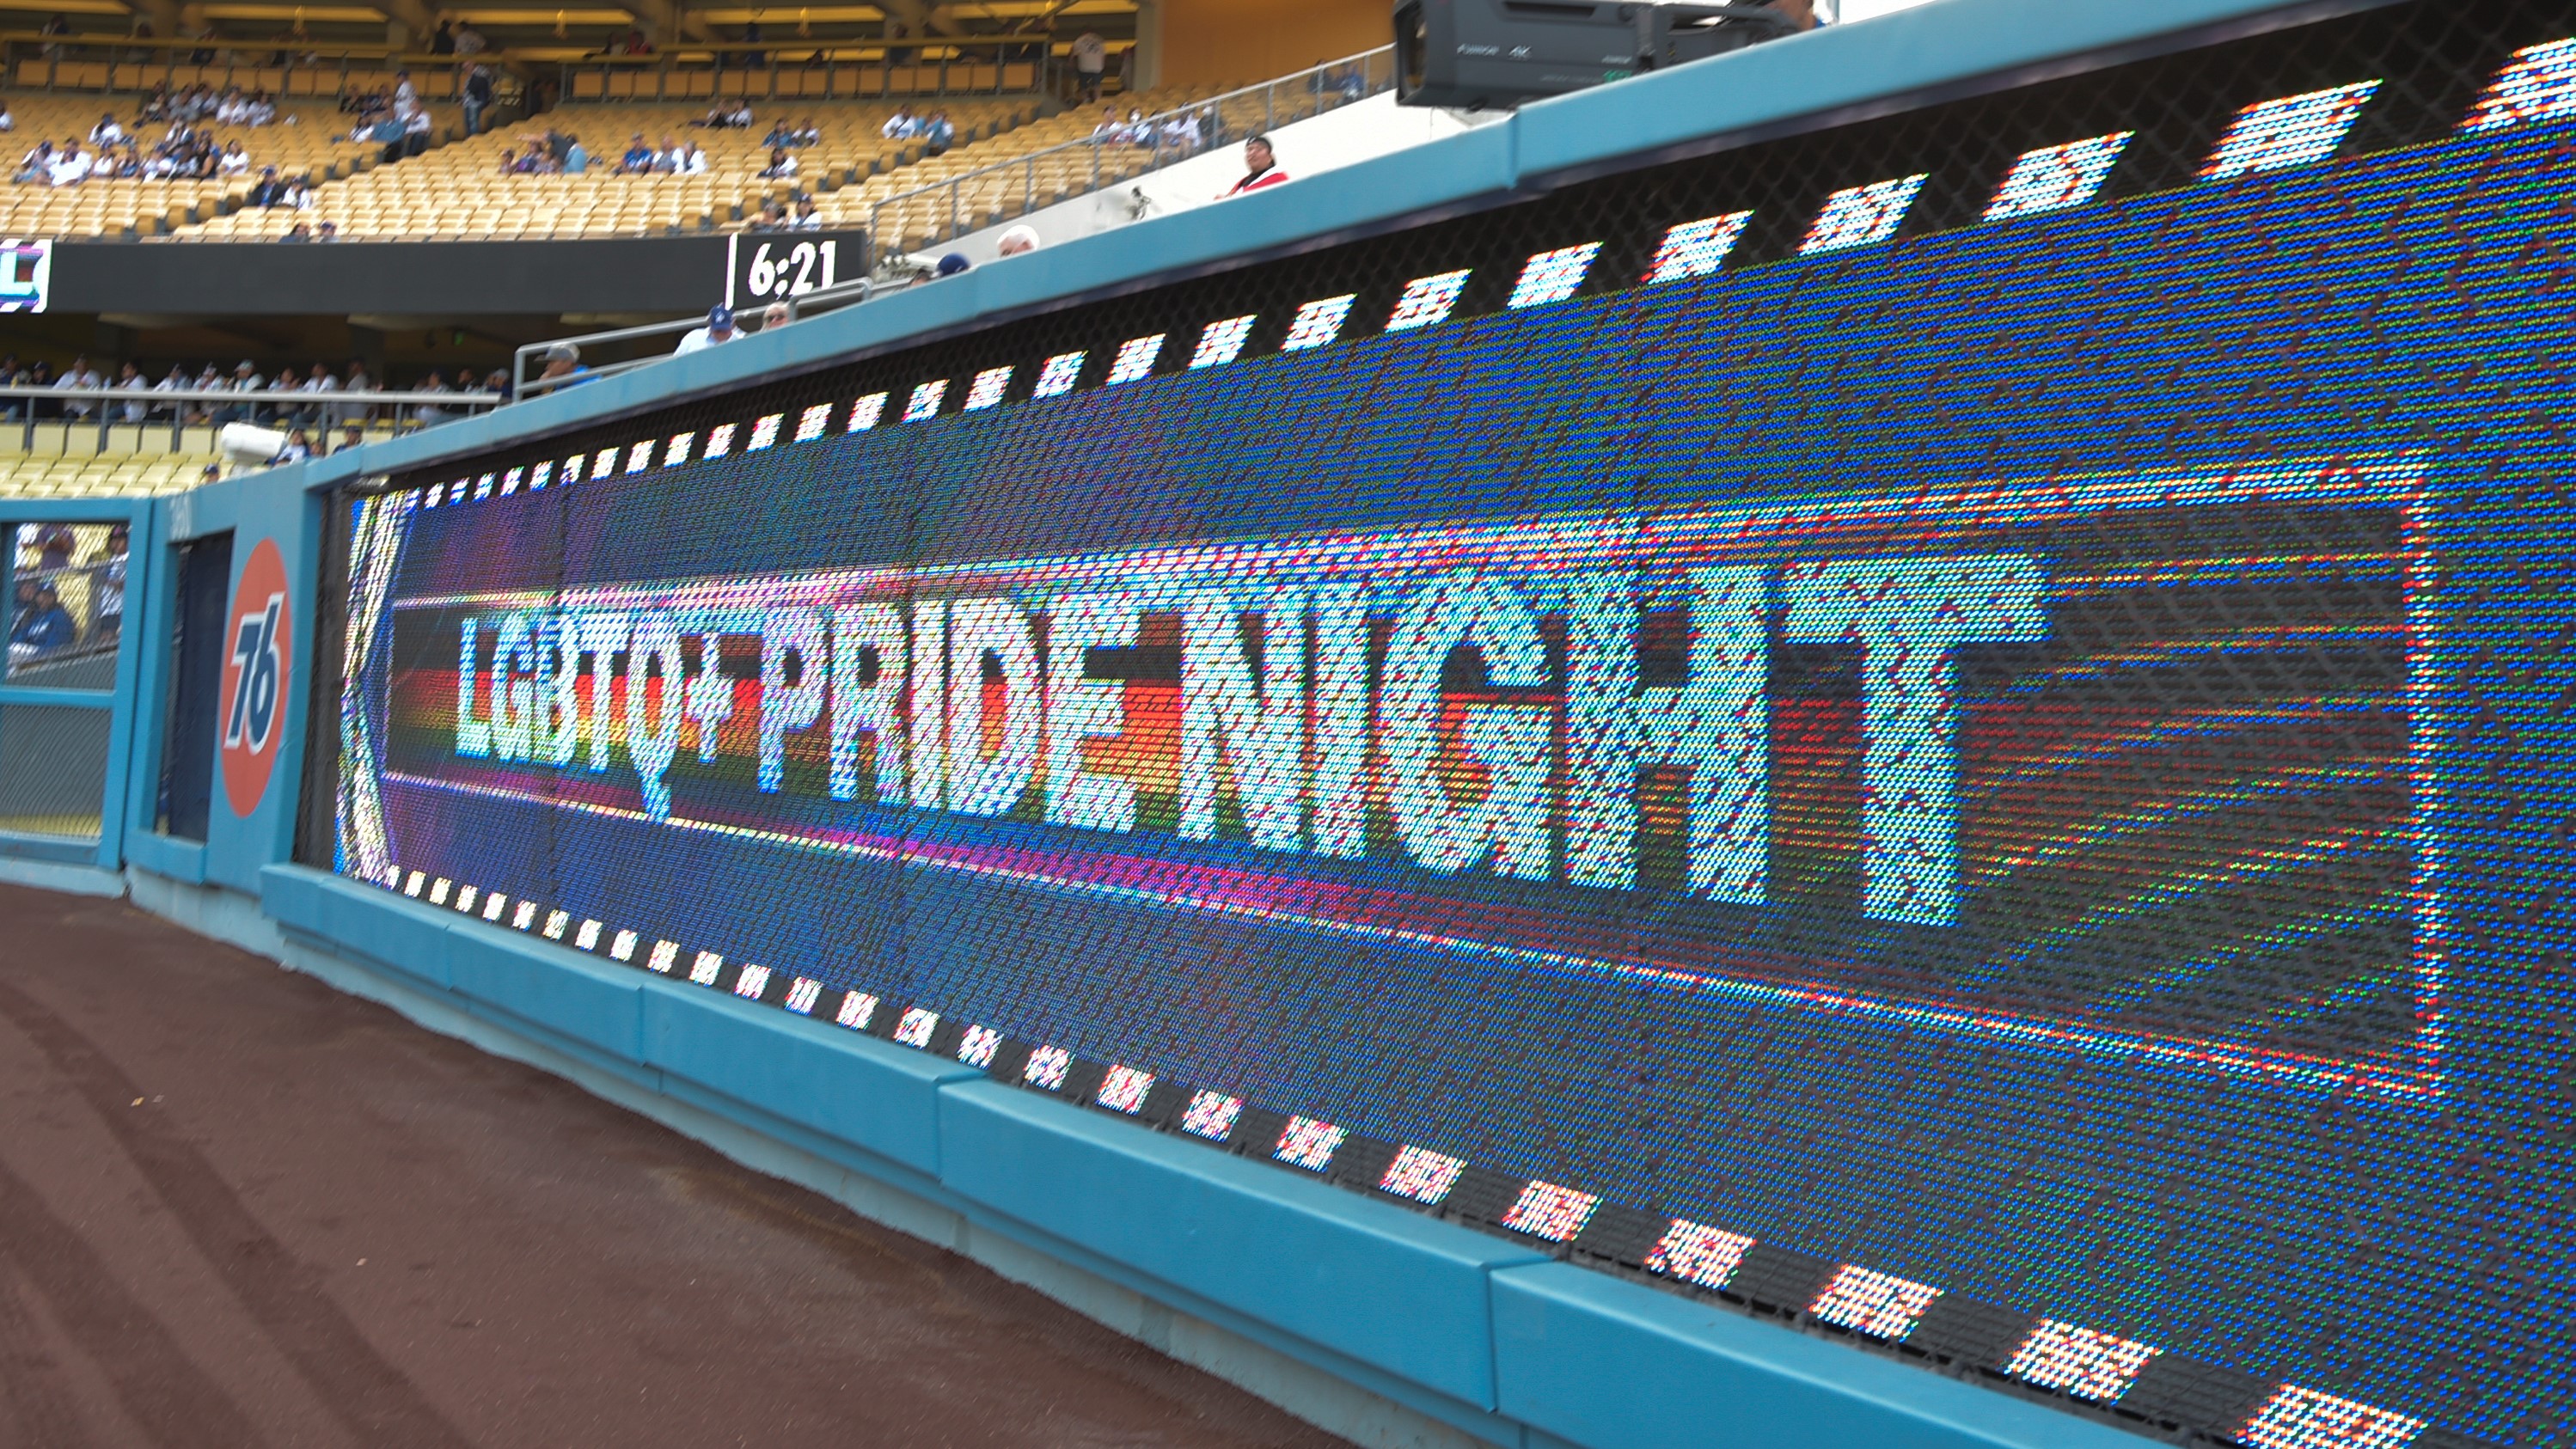 Dodgers' faith night 'not enough' to make up for honoring 'drag